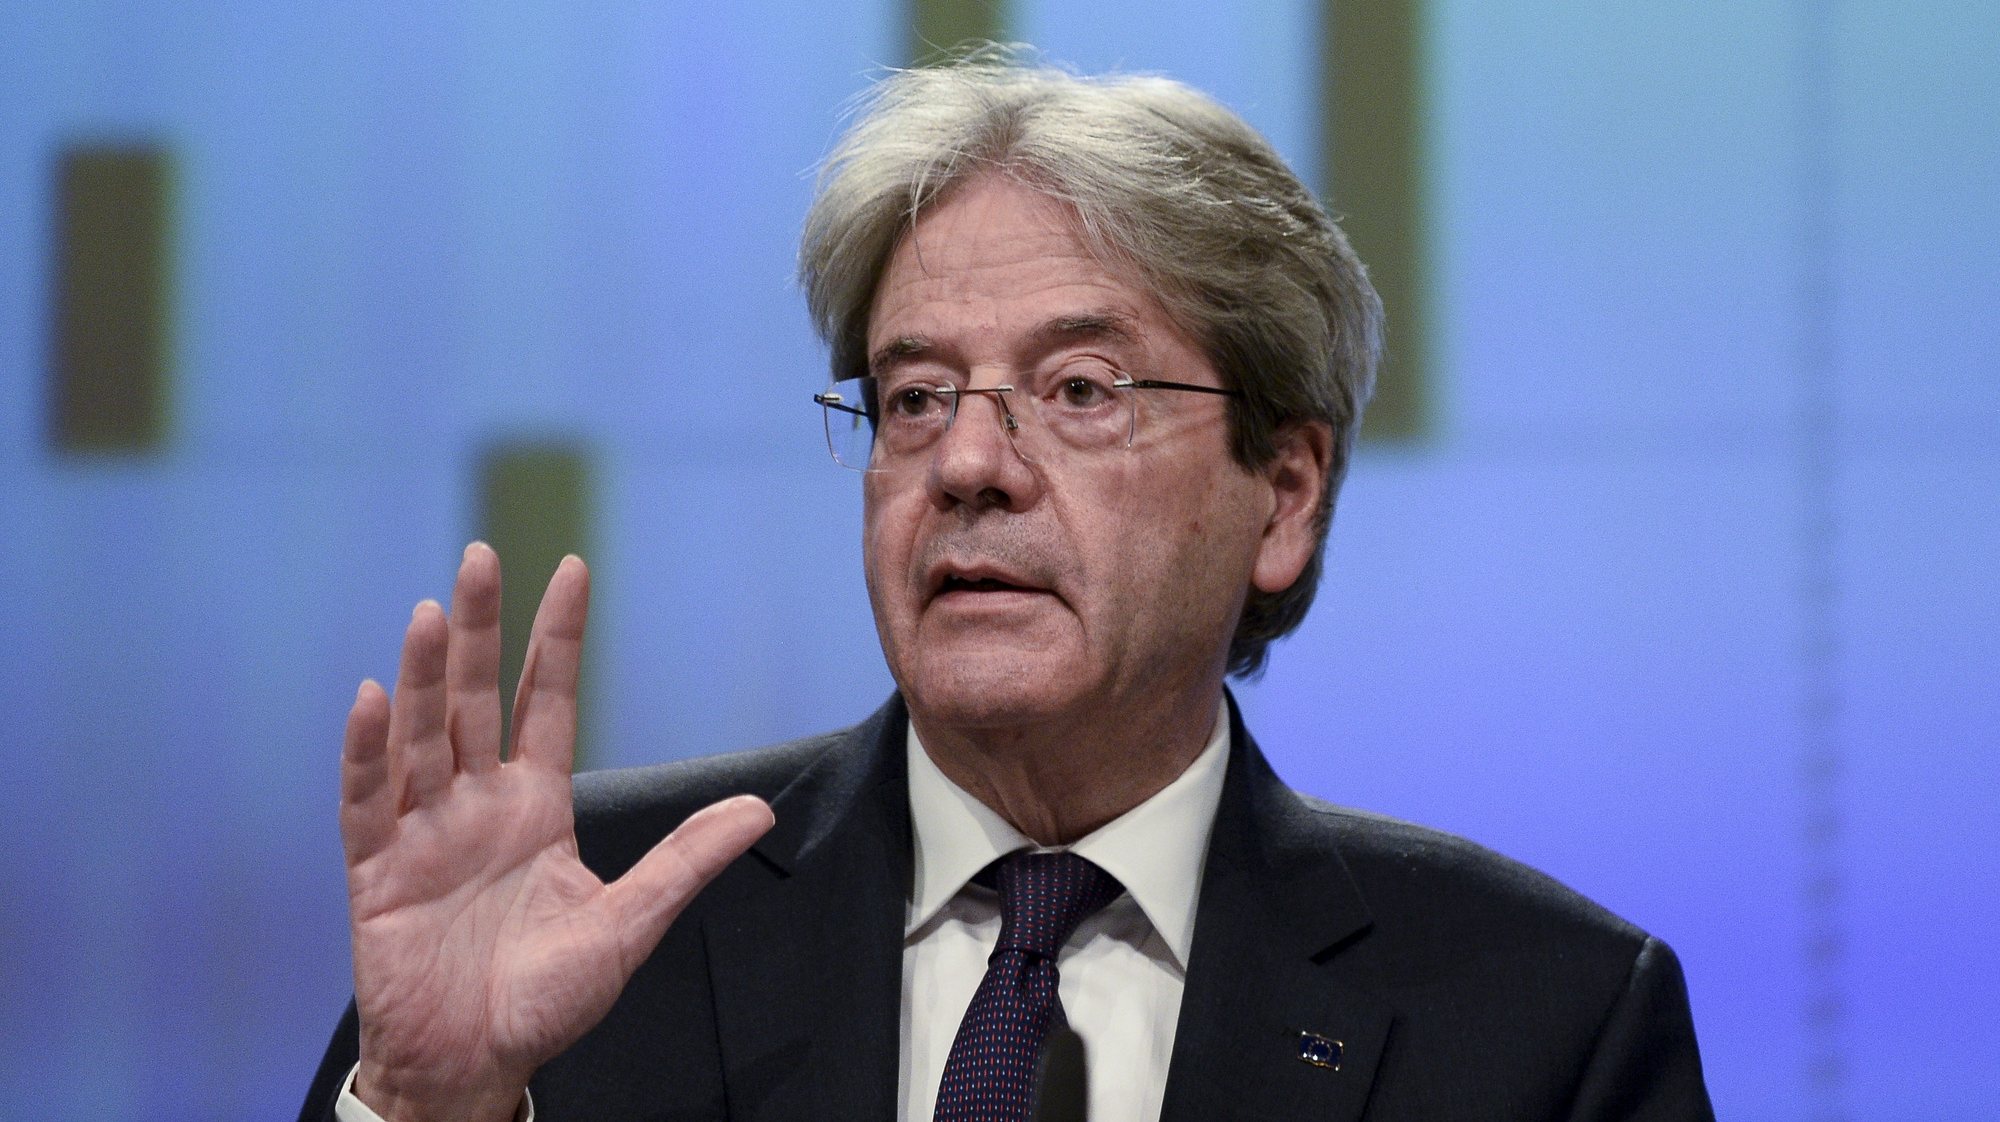 epa09193239 European Commissioner for Economy Paolo Gentiloni attends a news conference on the economic forecast for spring 2021 in Brussels, Belgium, 12 May 2021.  EPA/JOHANNA GERON / POOL